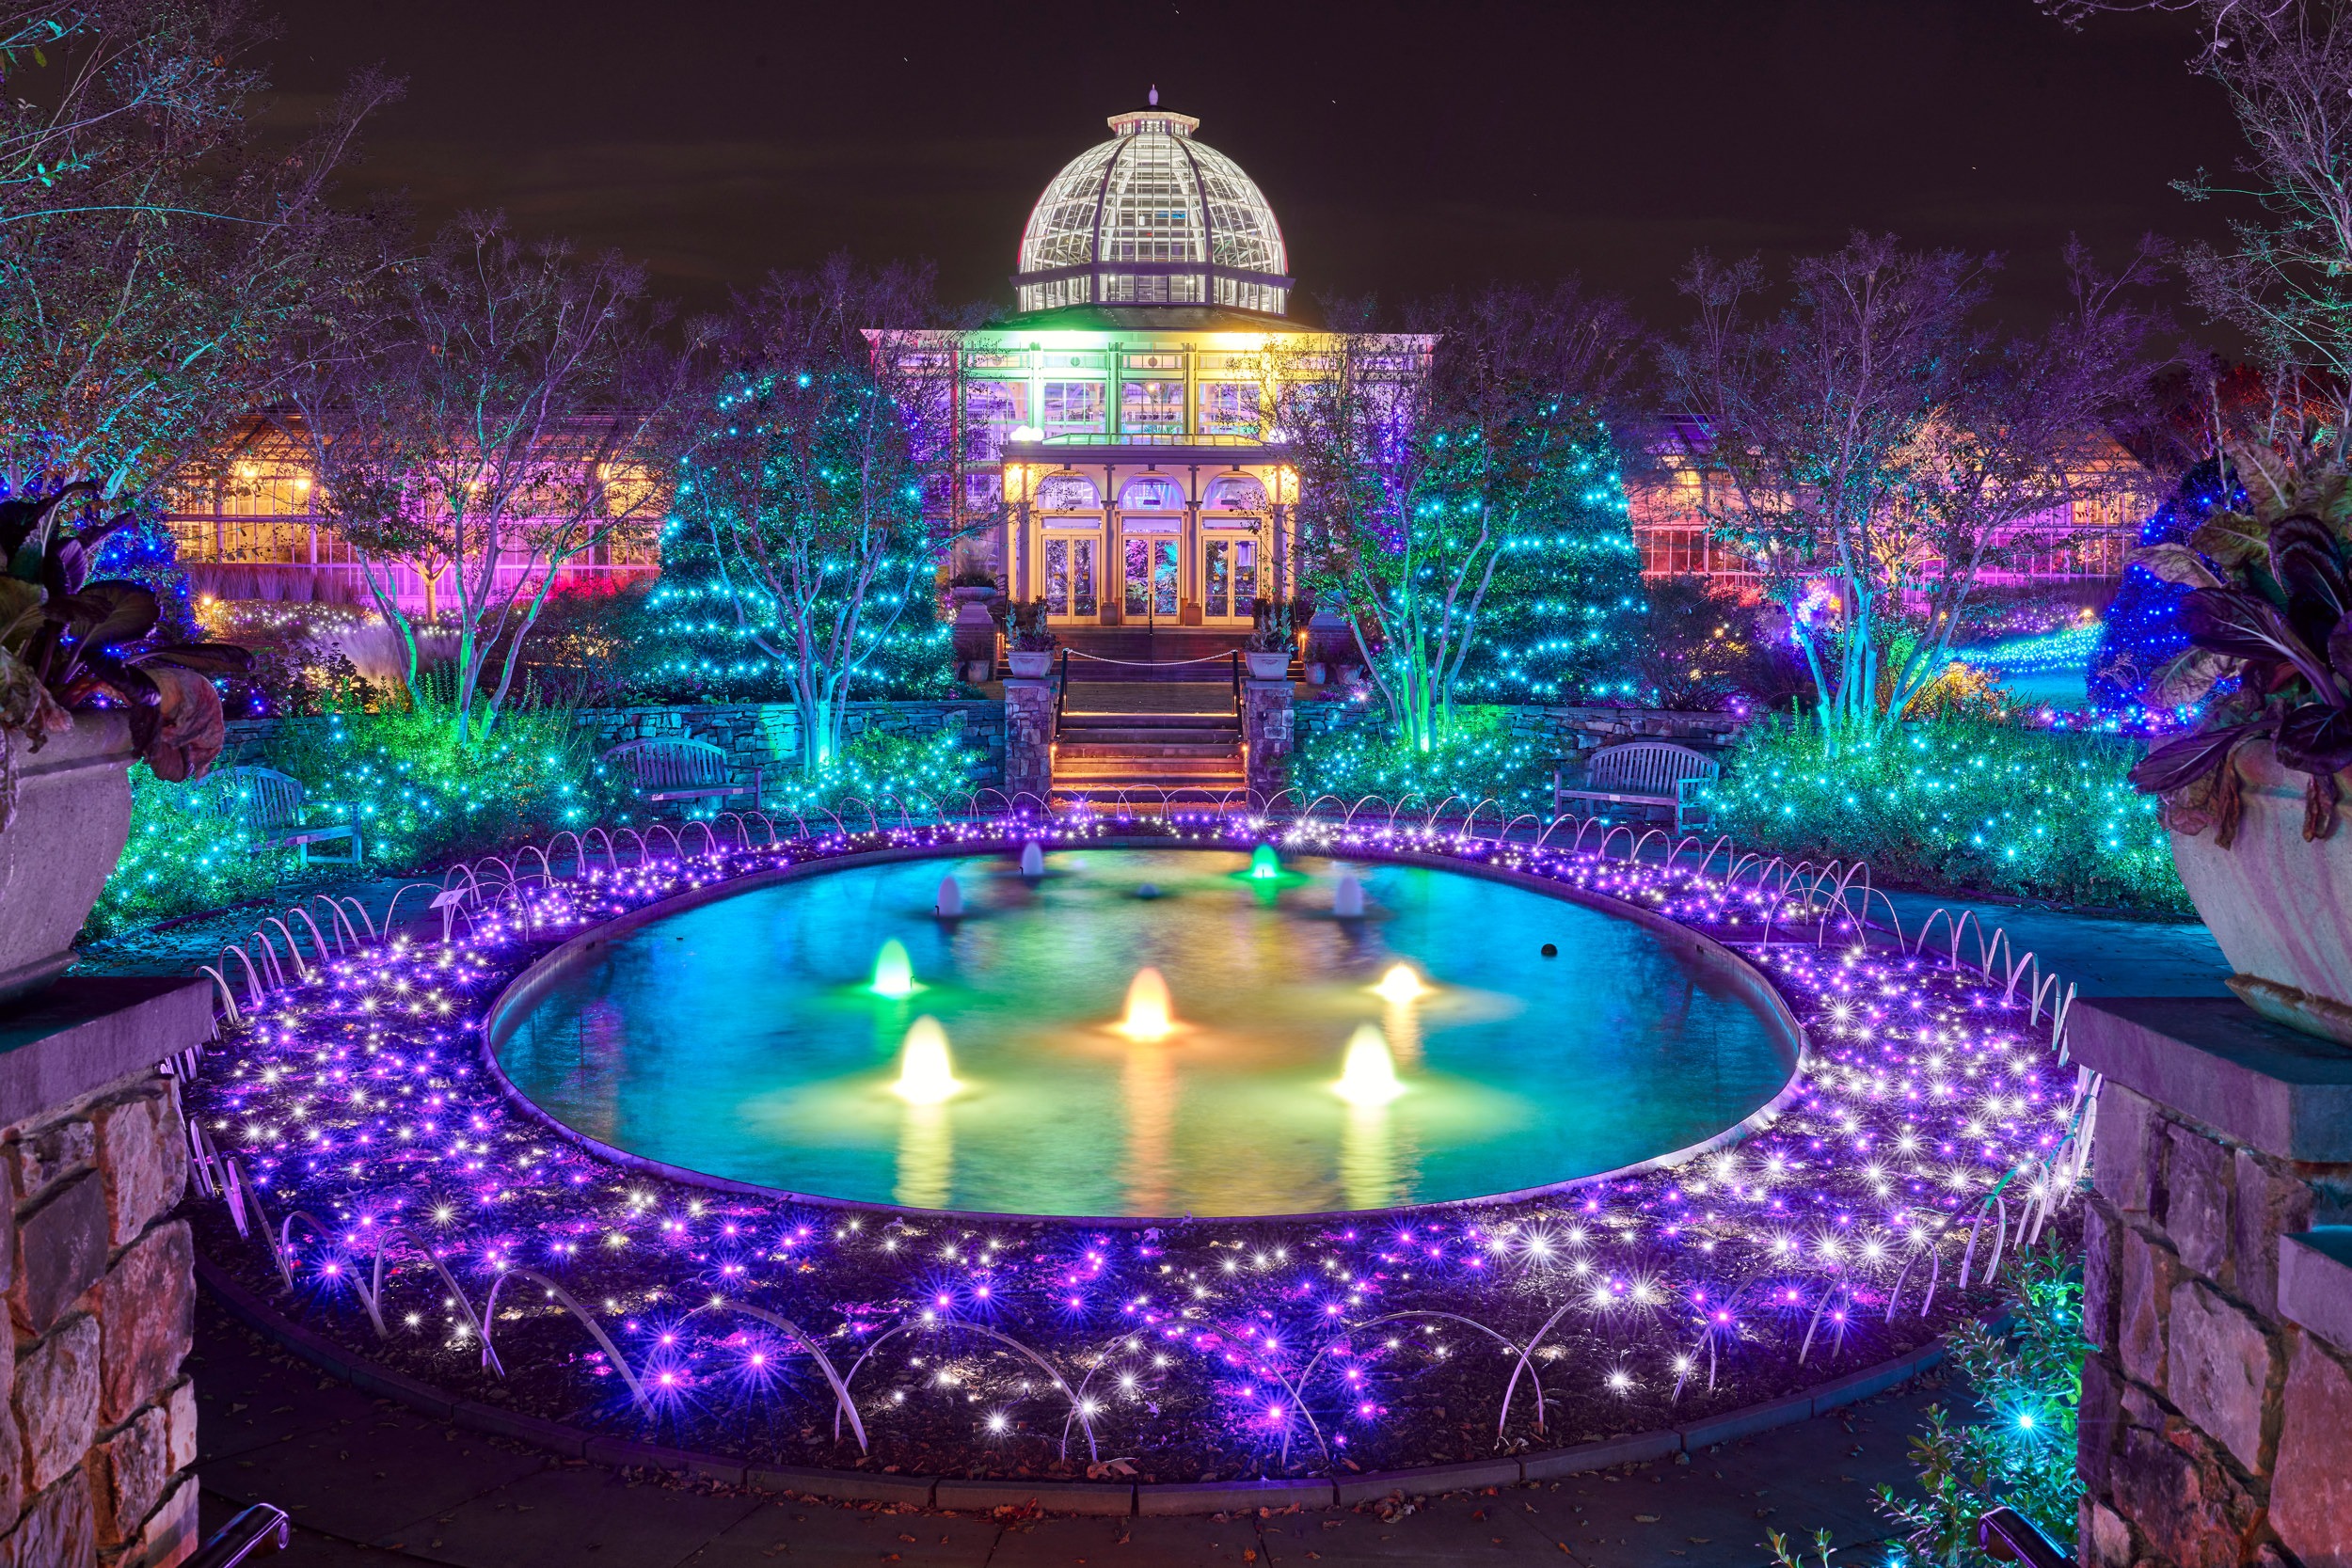 Best Places for a Proposal - Lewis Ginter Botanical Garden